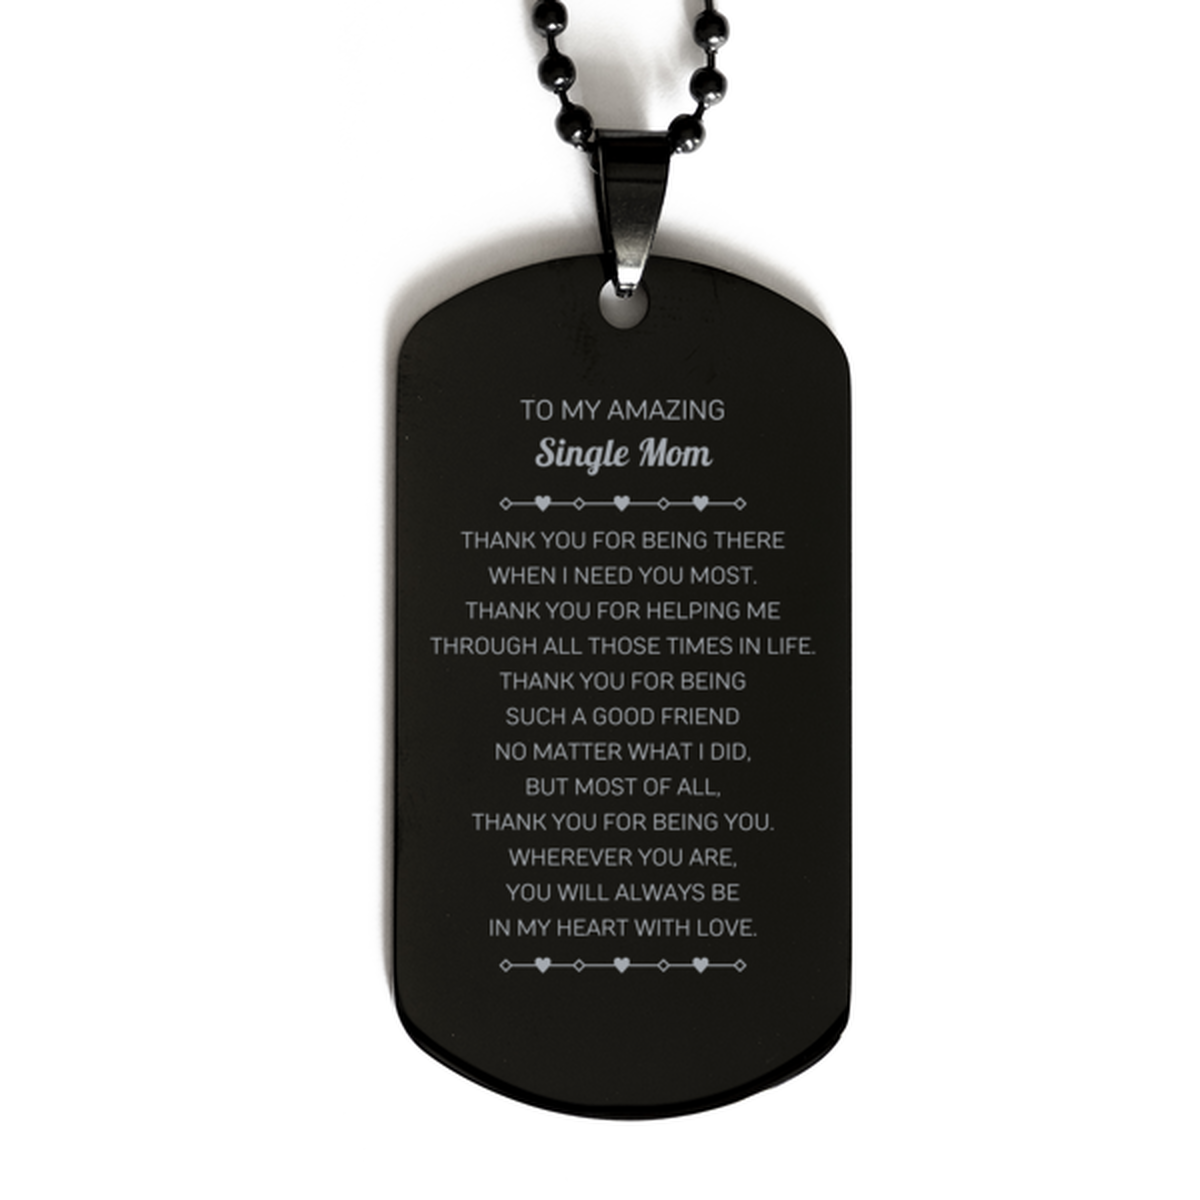 To My Amazing Single Mom Black Dog Tag, Thank you for being there, Thank You Gifts For Single Mom, Birthday, Christmas Unique Gifts For Single Mom